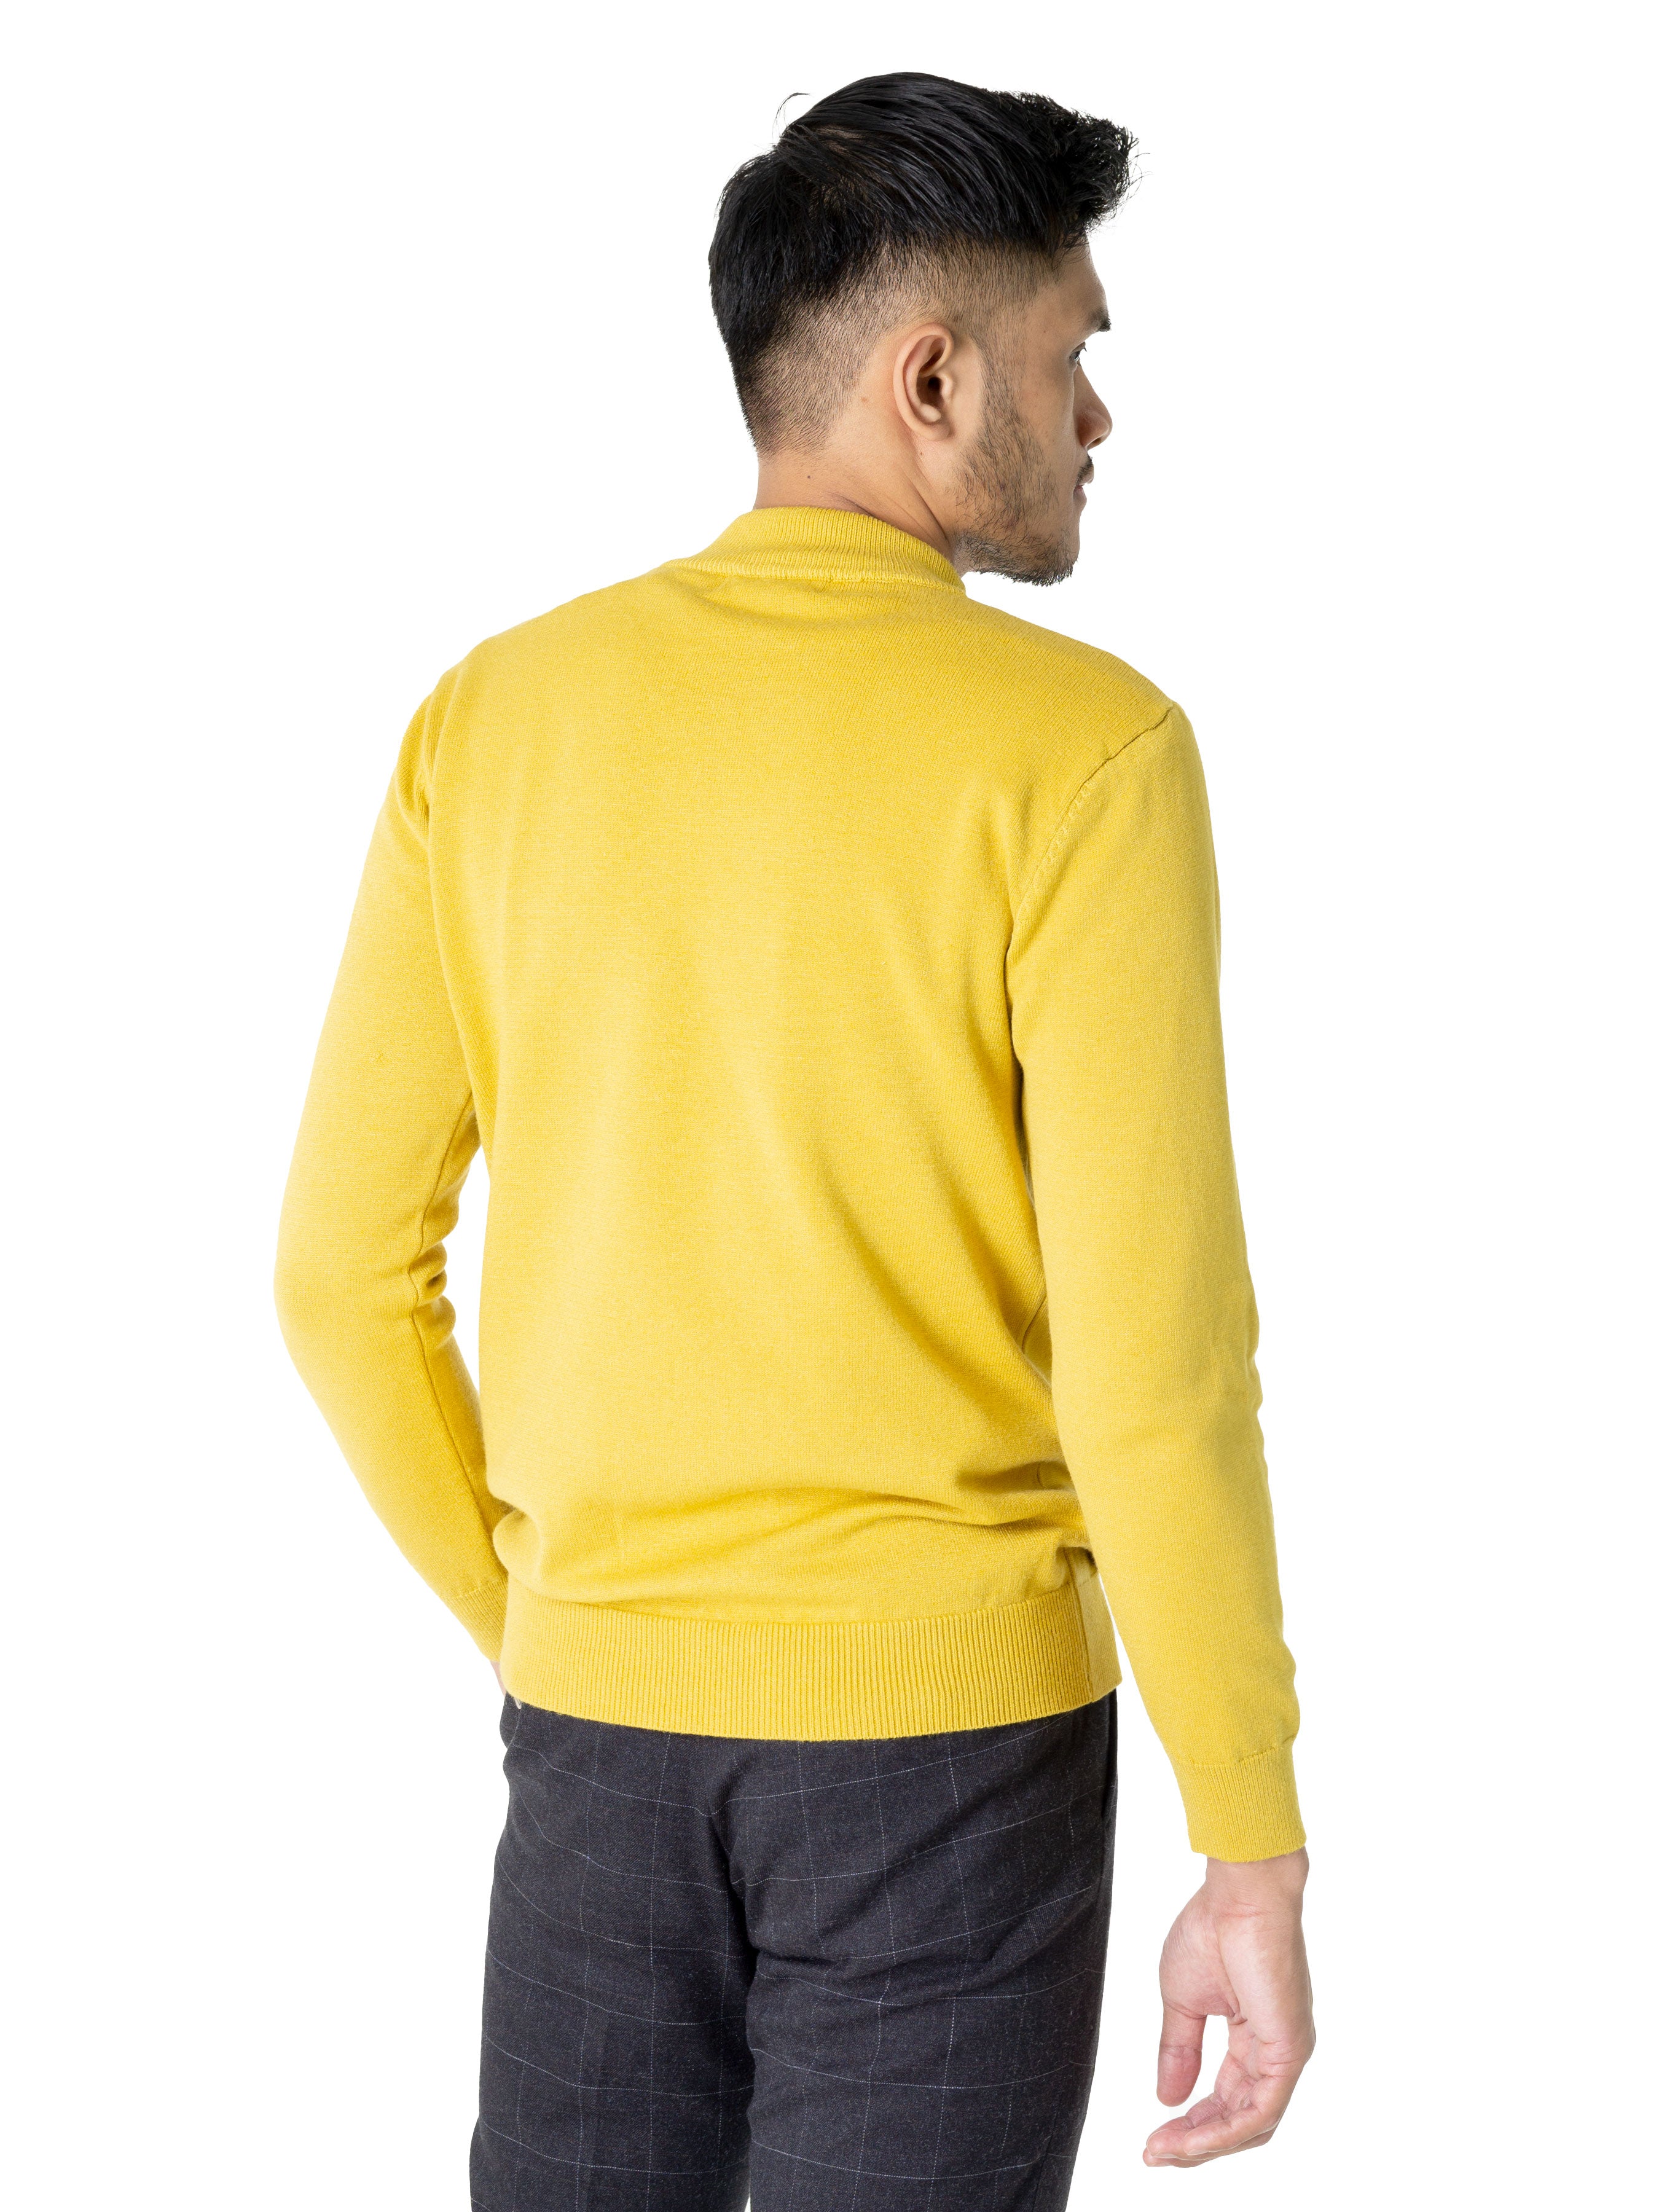 Turtleneck Cashmere Sweater - Yellow - Zeve Shoes